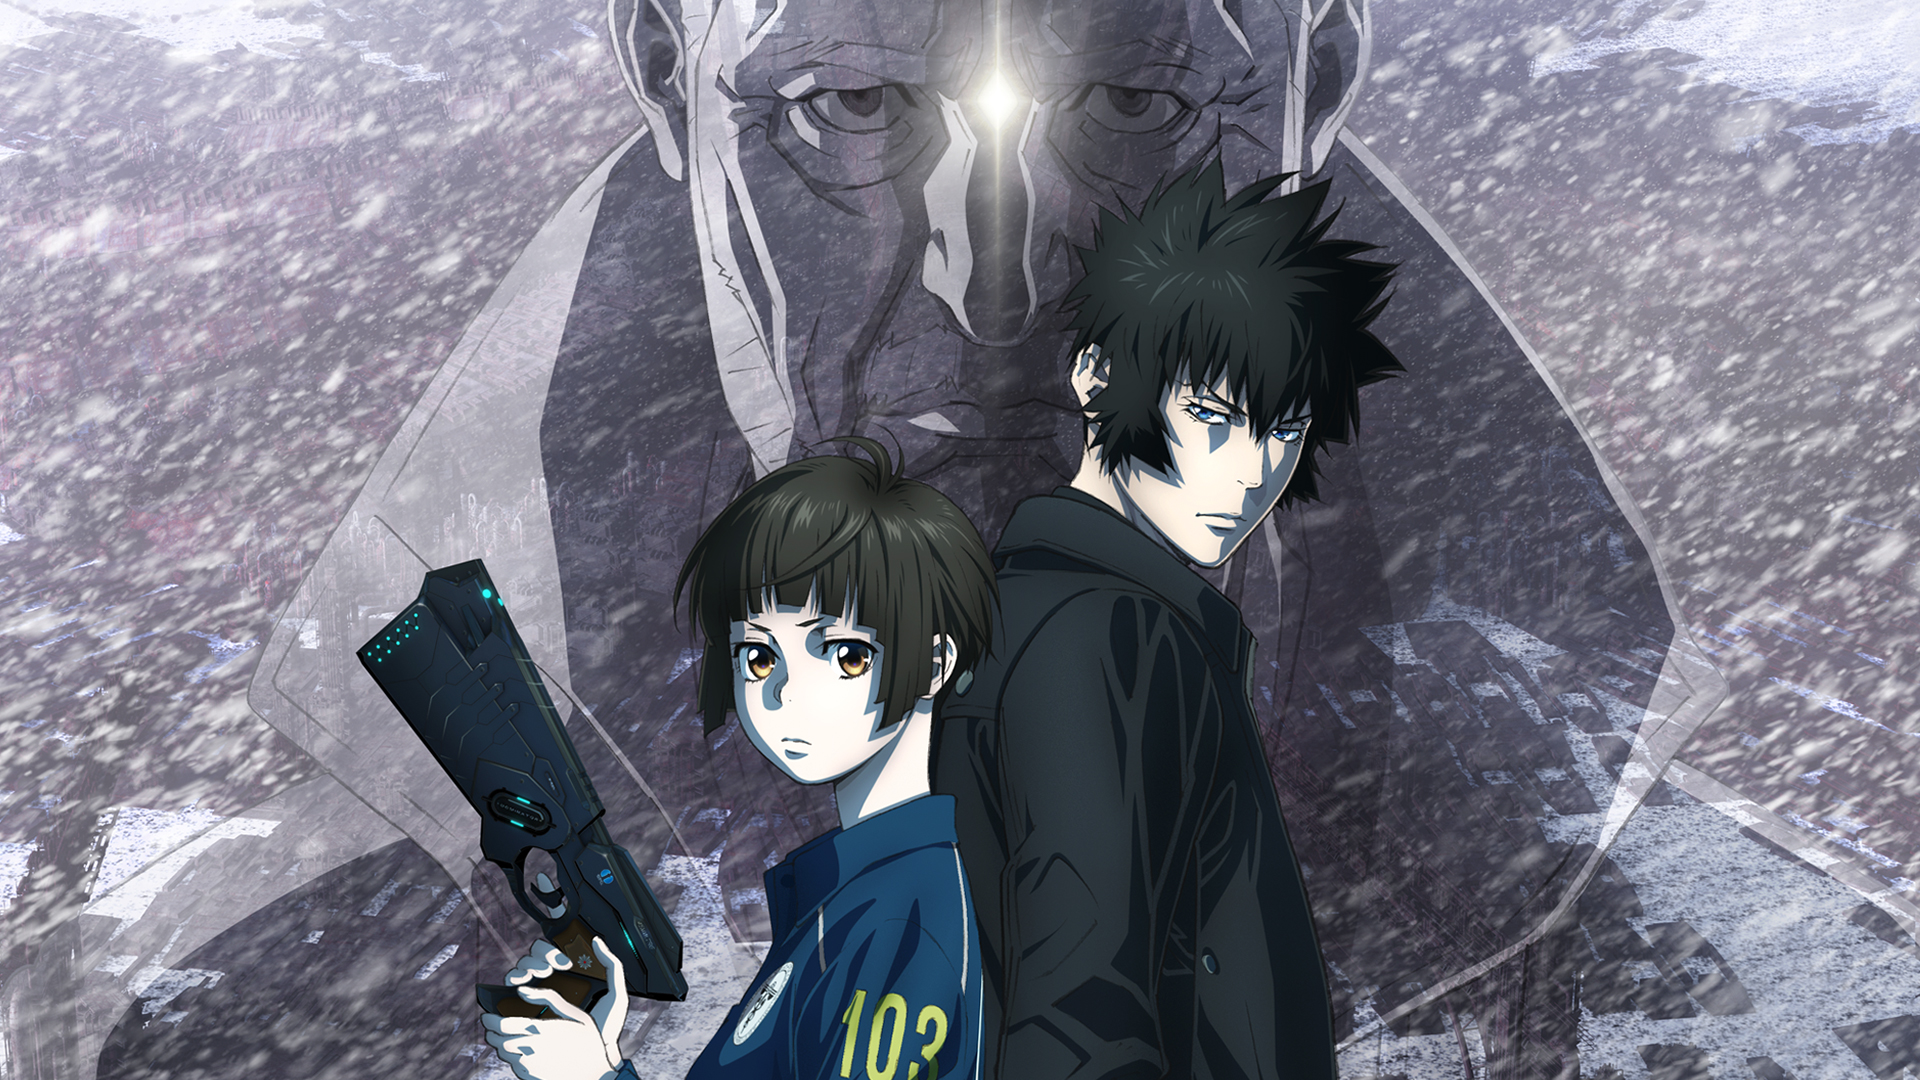 Sword Art Online & Psycho-Pass Movies Come to Crunchyroll This Month